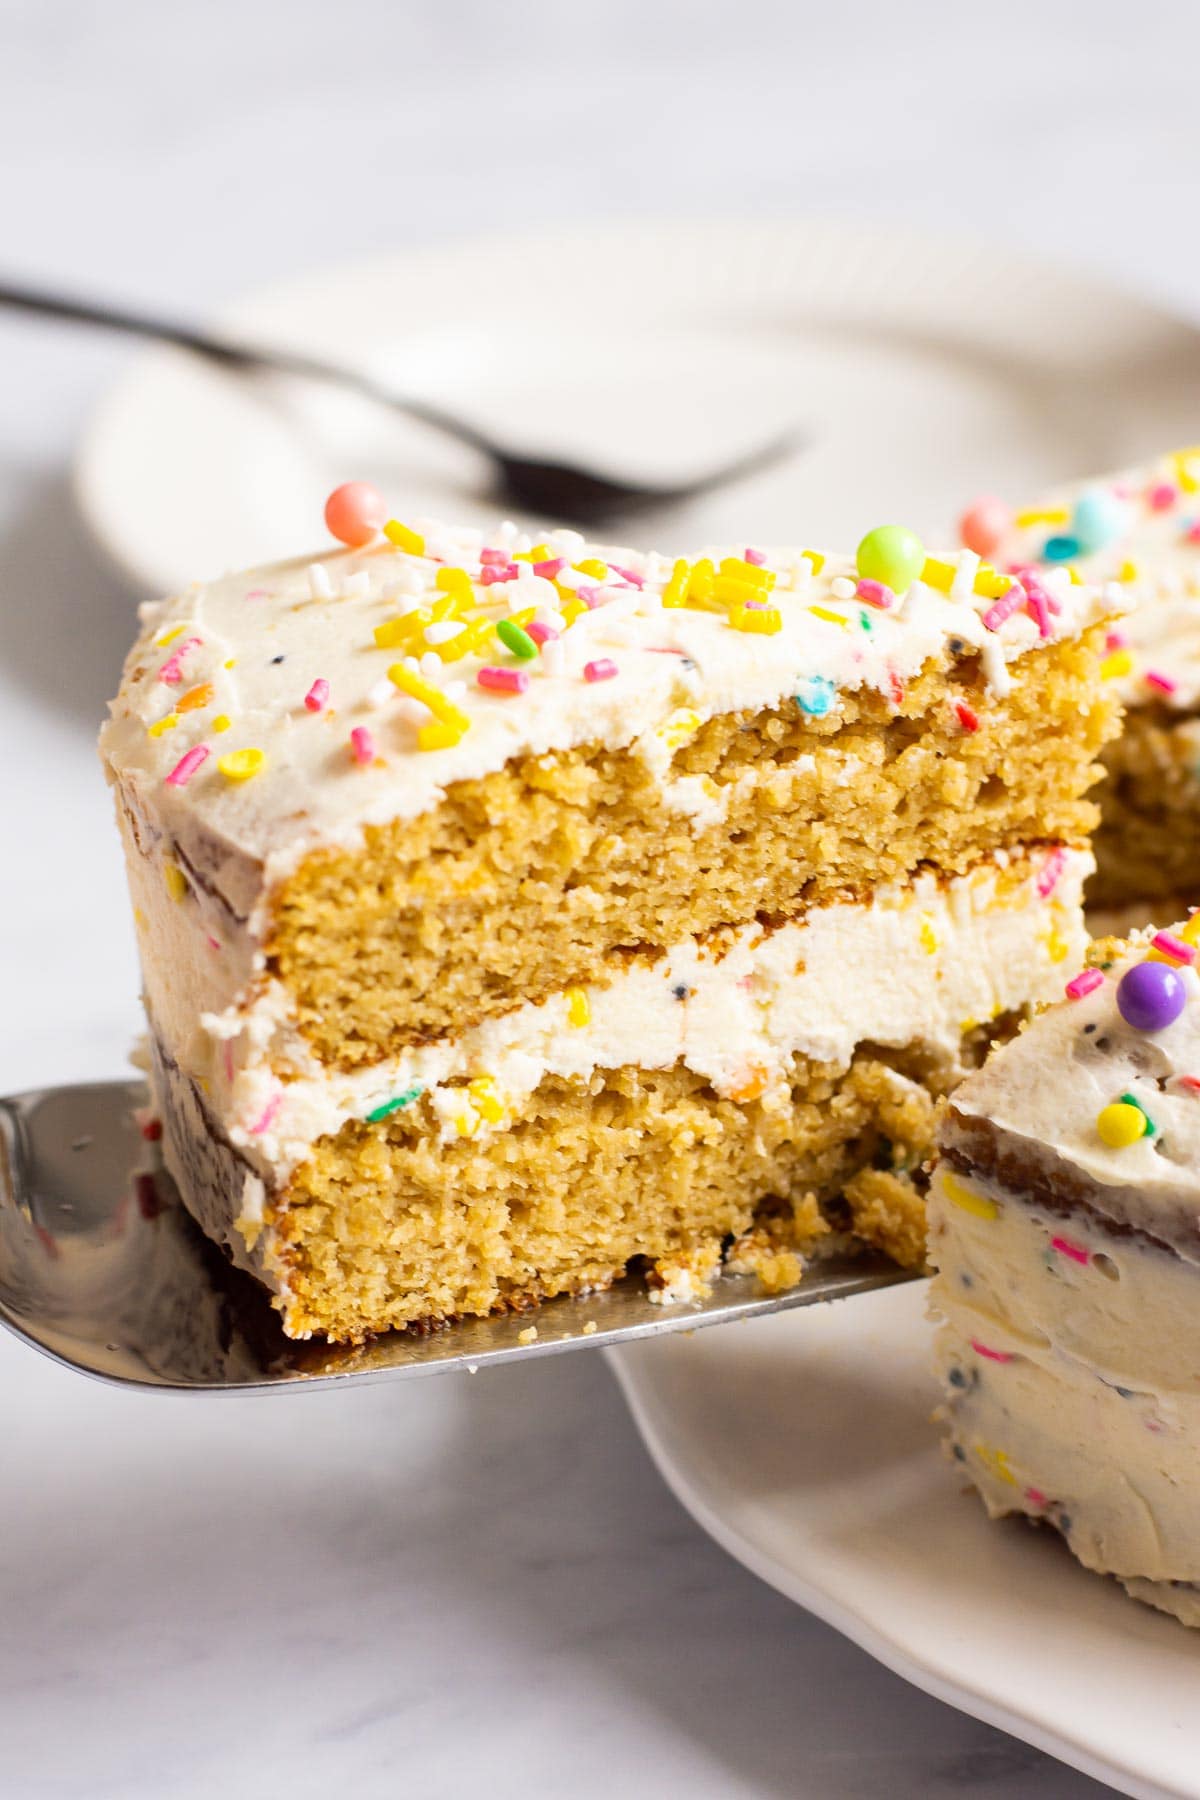 Healthy birthday cake with sprinkles being served with a silver cake server.